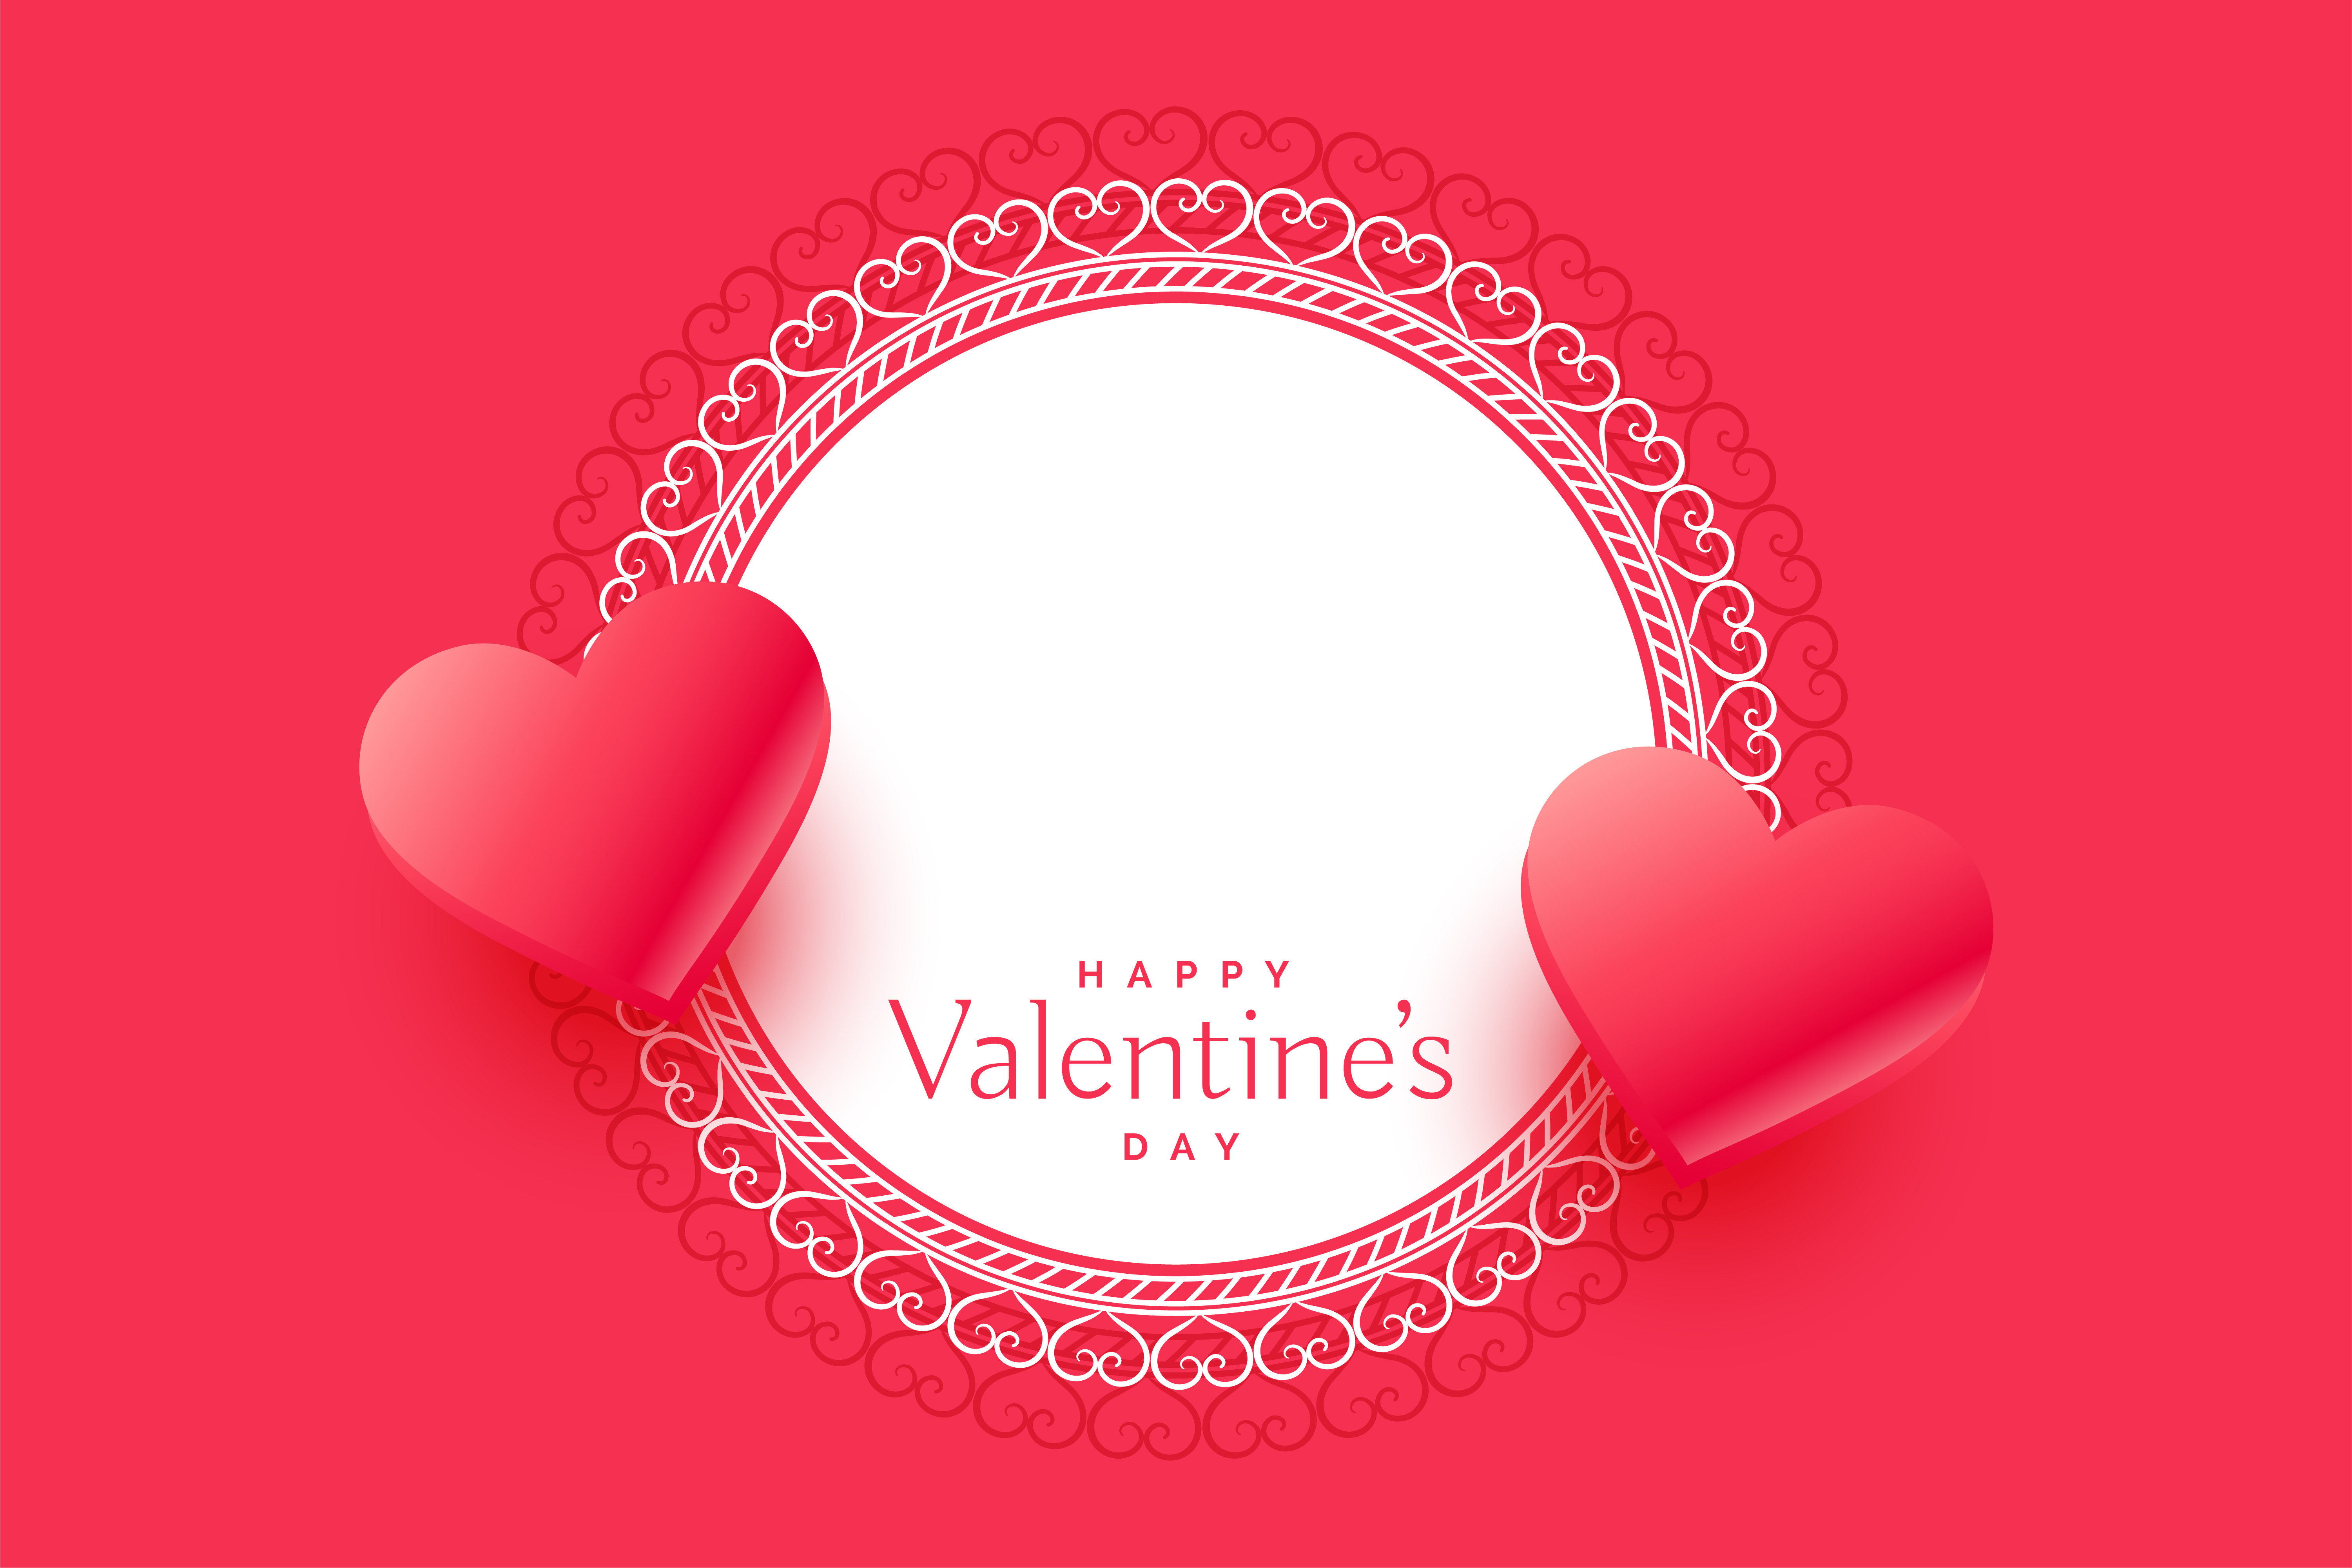 beautiful valentines day hearts greeting with text space - Download Free Vector Art ...6001 x 4001